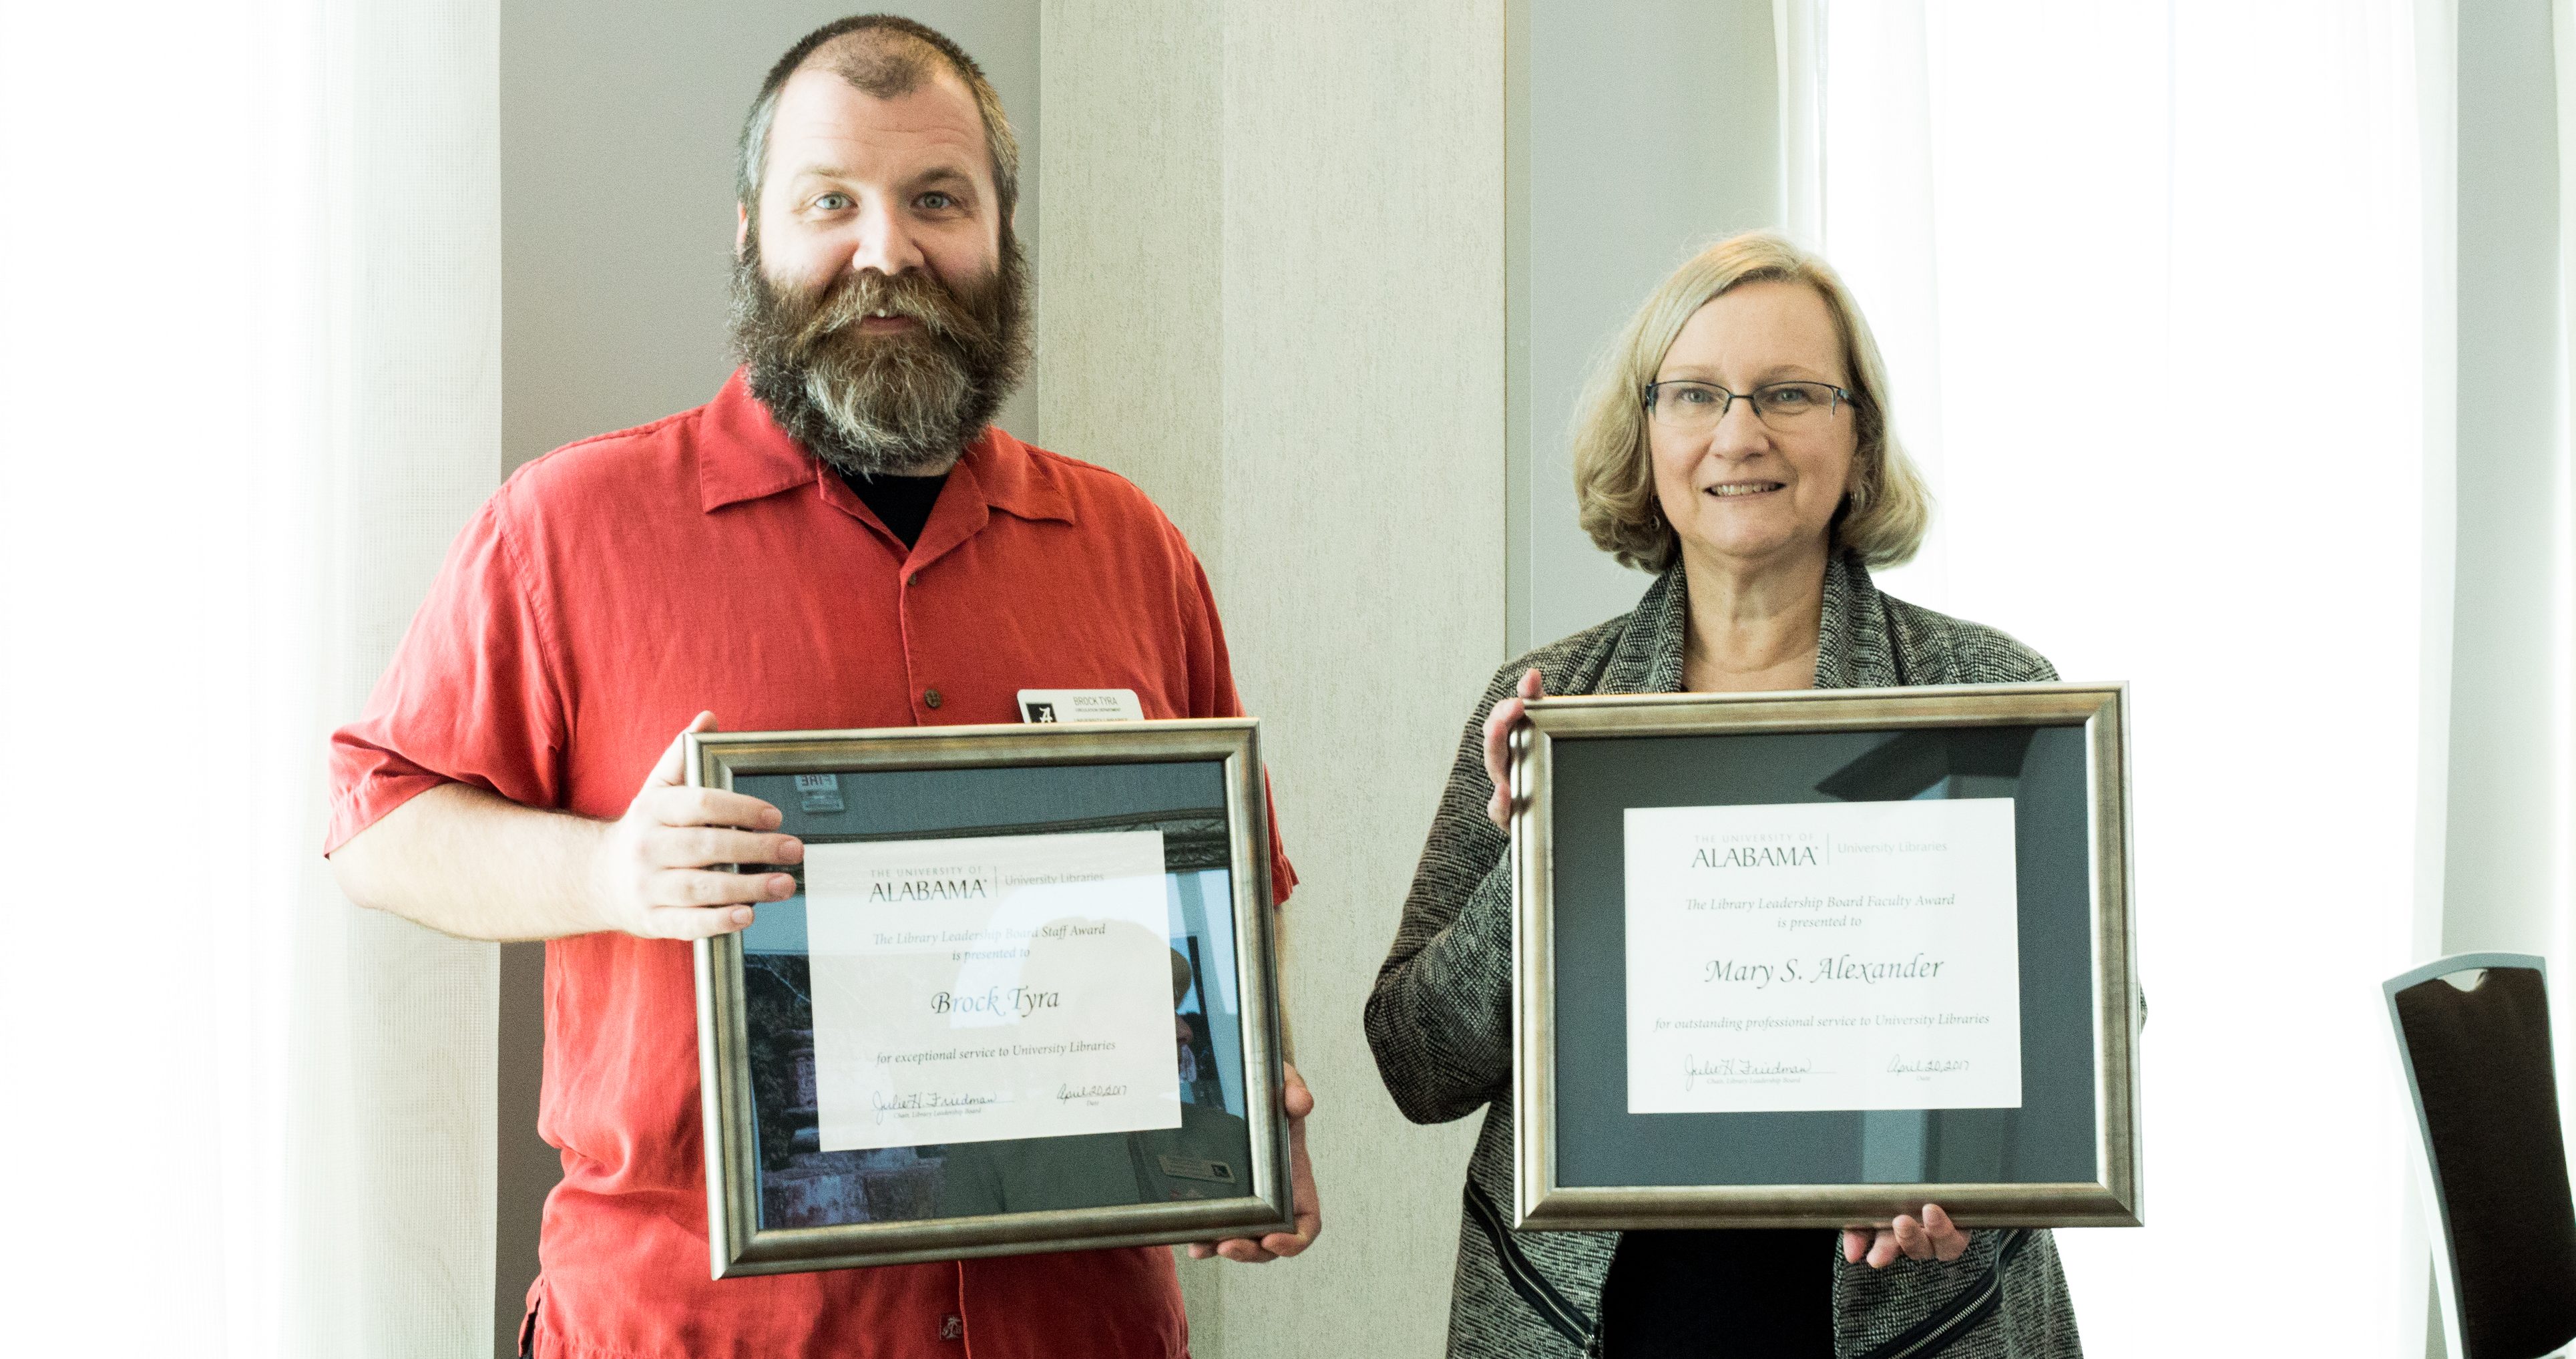 Two longtime Employees Win 2017 Library Leadership Faculty and Staff Awards